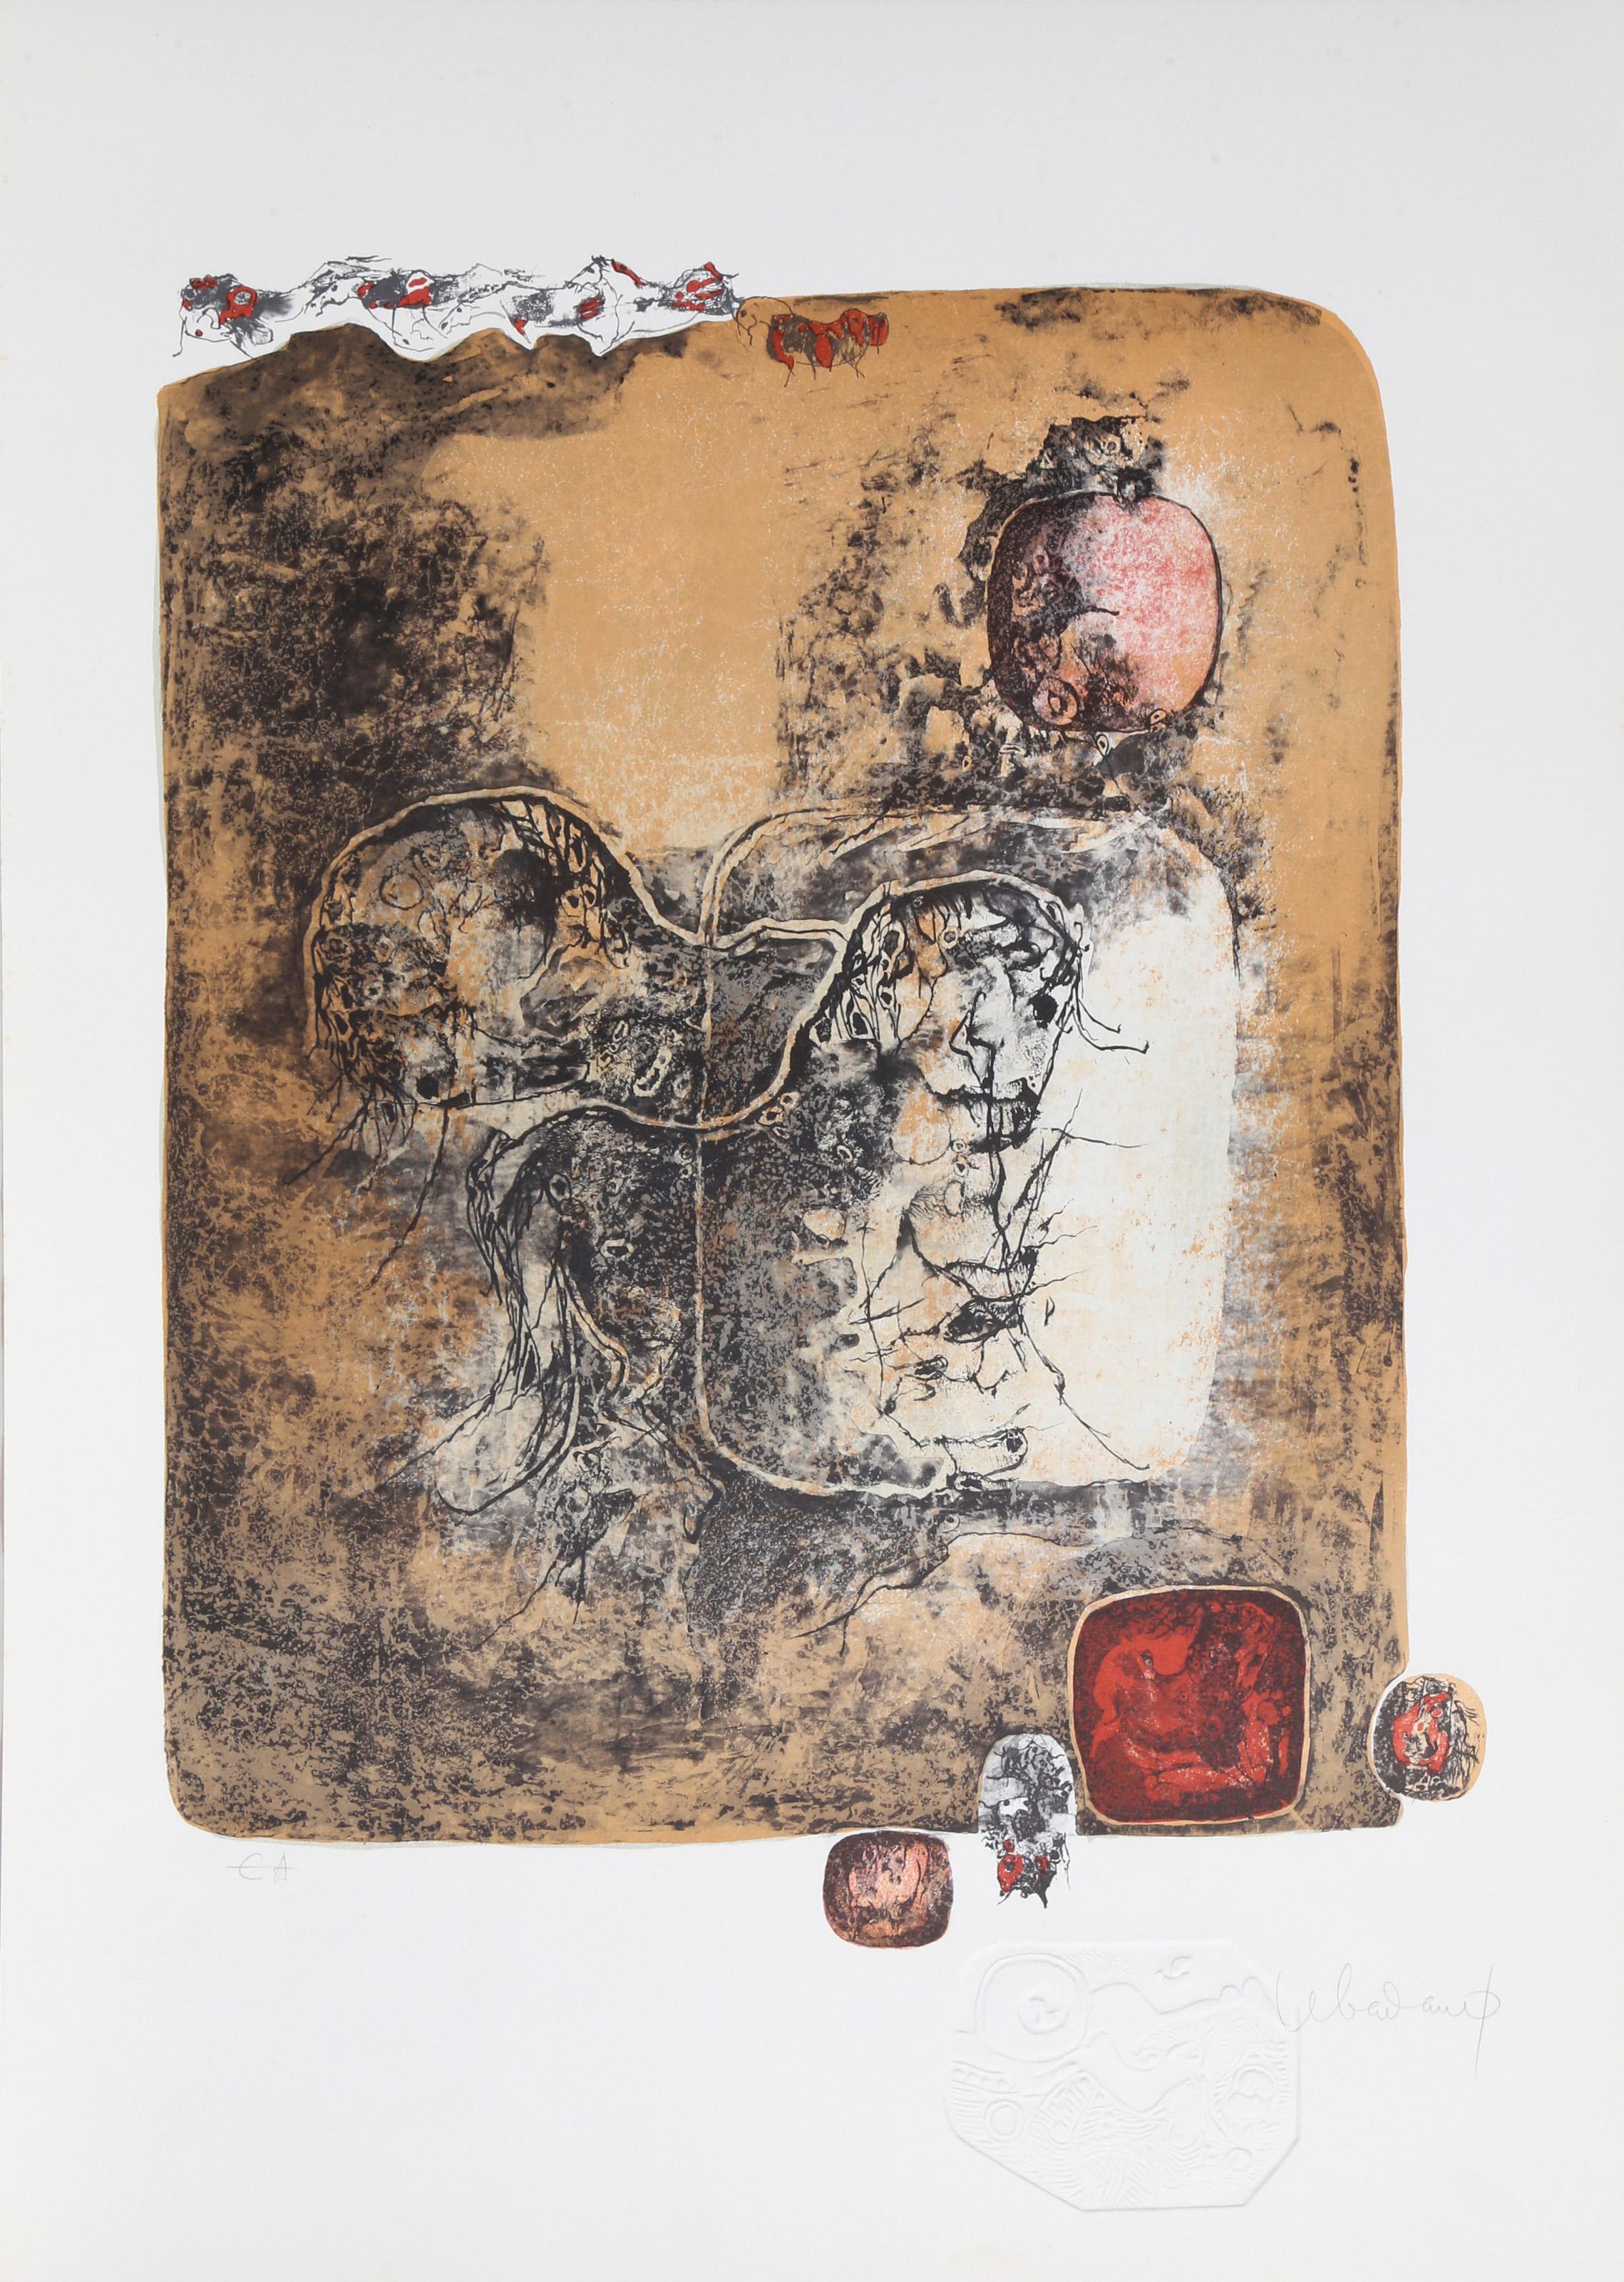 Lebadang (aka Hoi), Vietnamese (1922 - 2015) -  6 from the 10 Horses portfolio. Year: 1974, Medium: Lithograph with Embossing, signed in pencil, Edition: EA, Size: 30 x 21 in. (76 x 53 cm) 